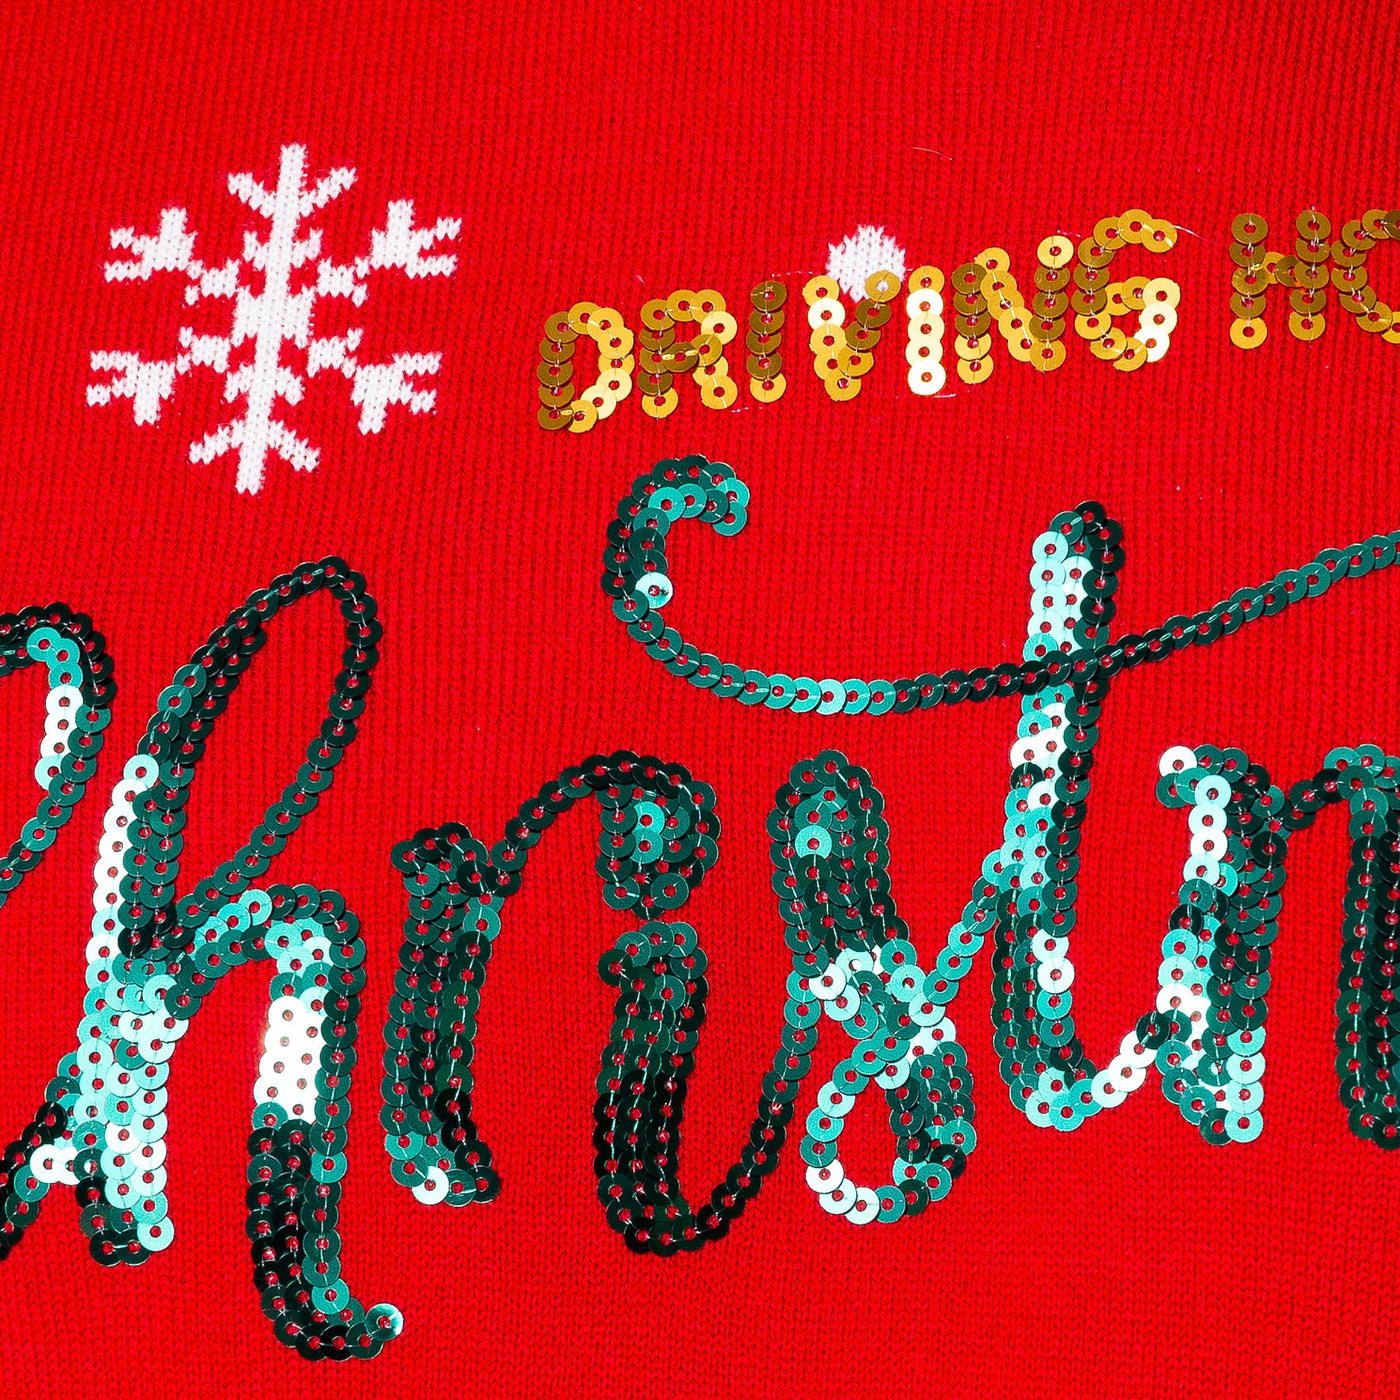 Men's Driving Home For Christmas Christmas Sweater